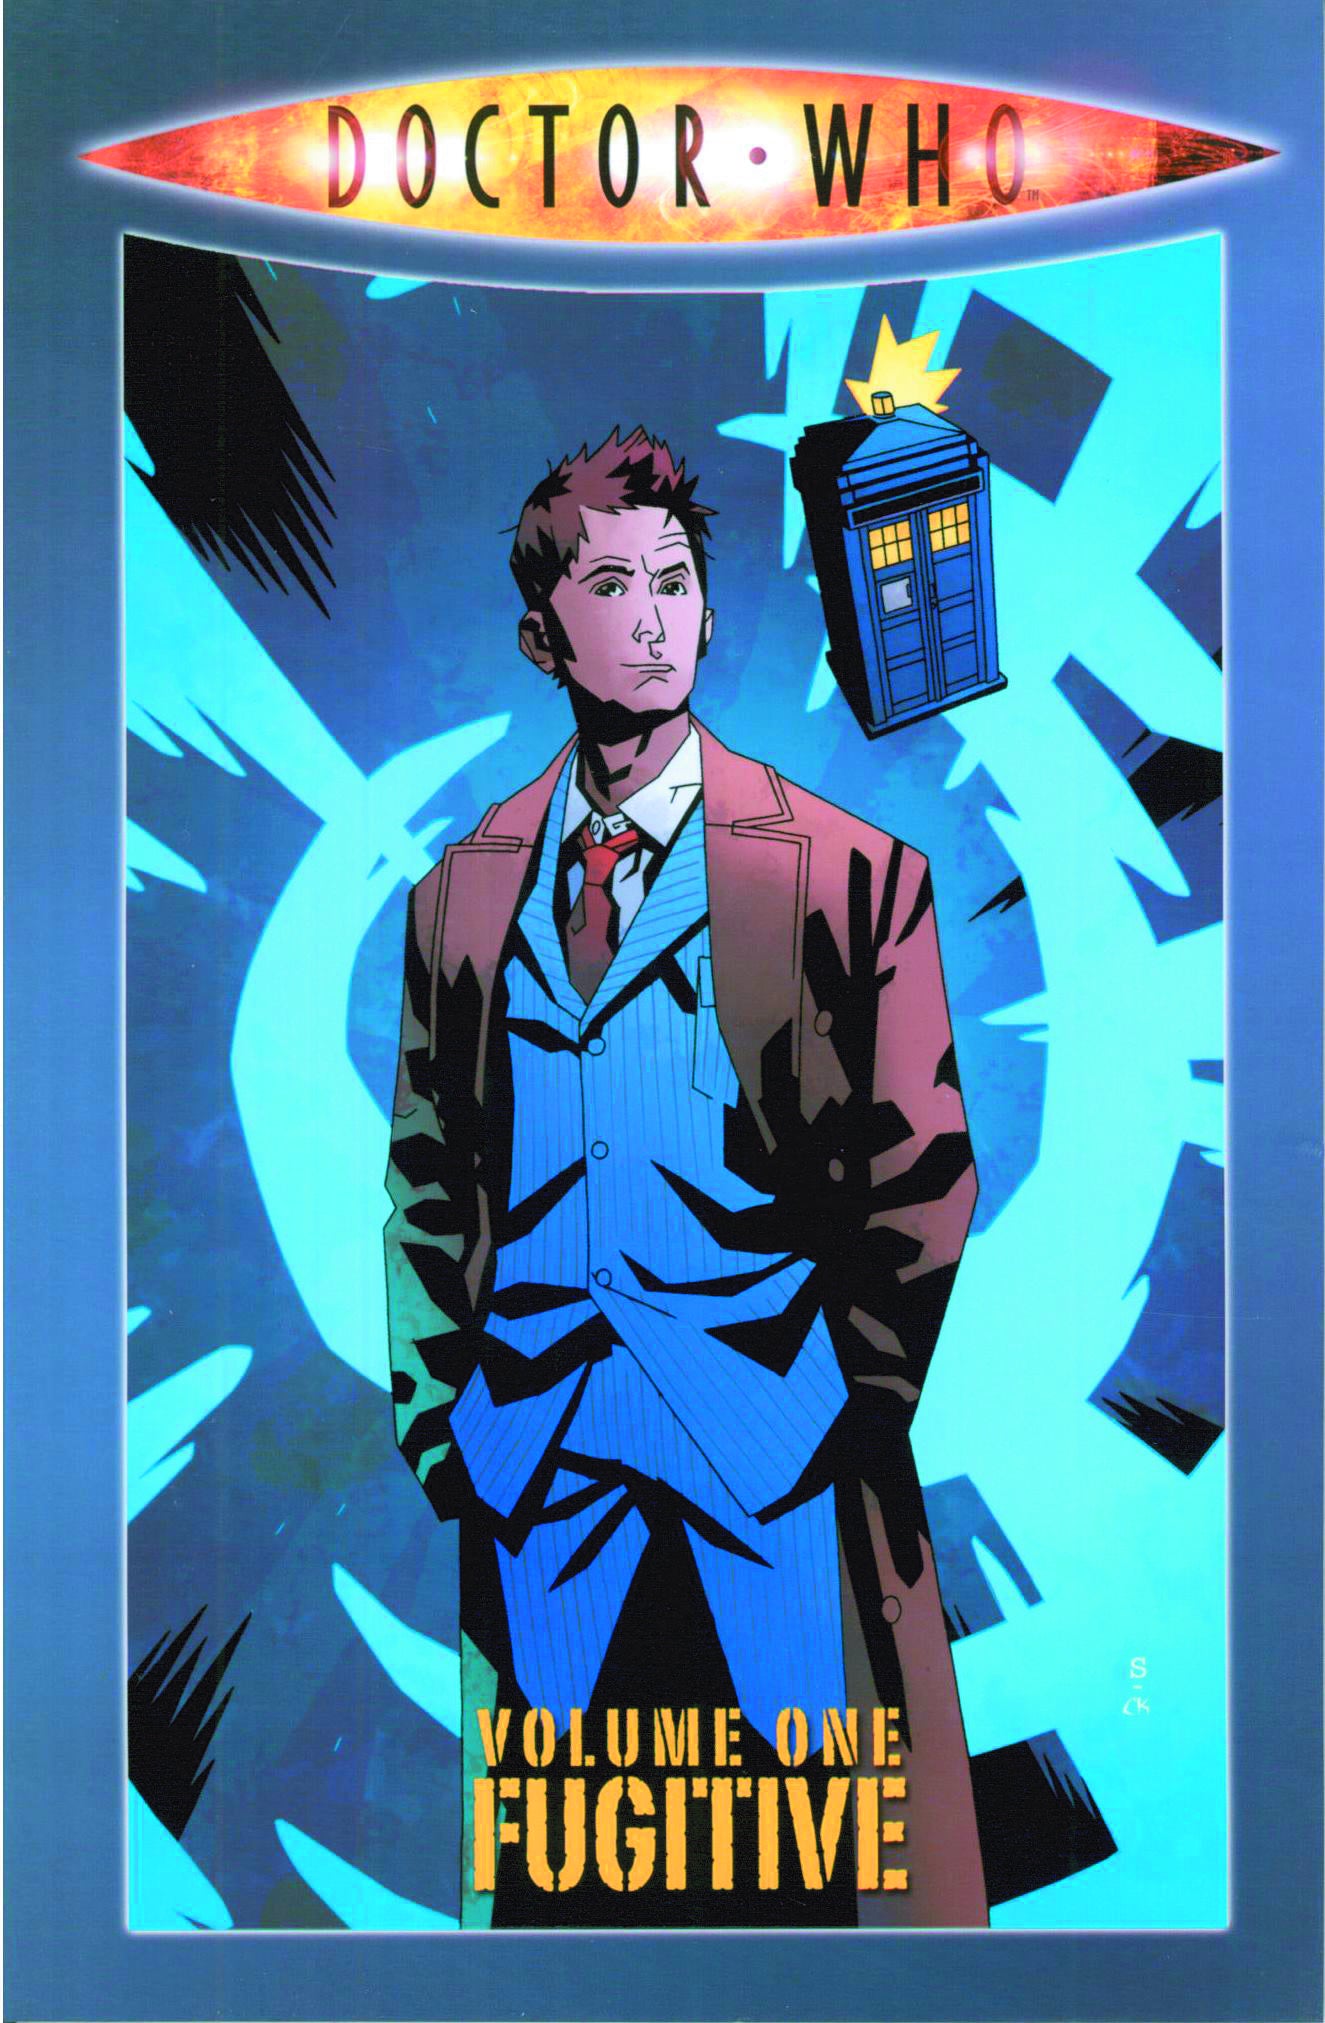 DOCTOR WHO (9th) VOL 01: FUGITIVE